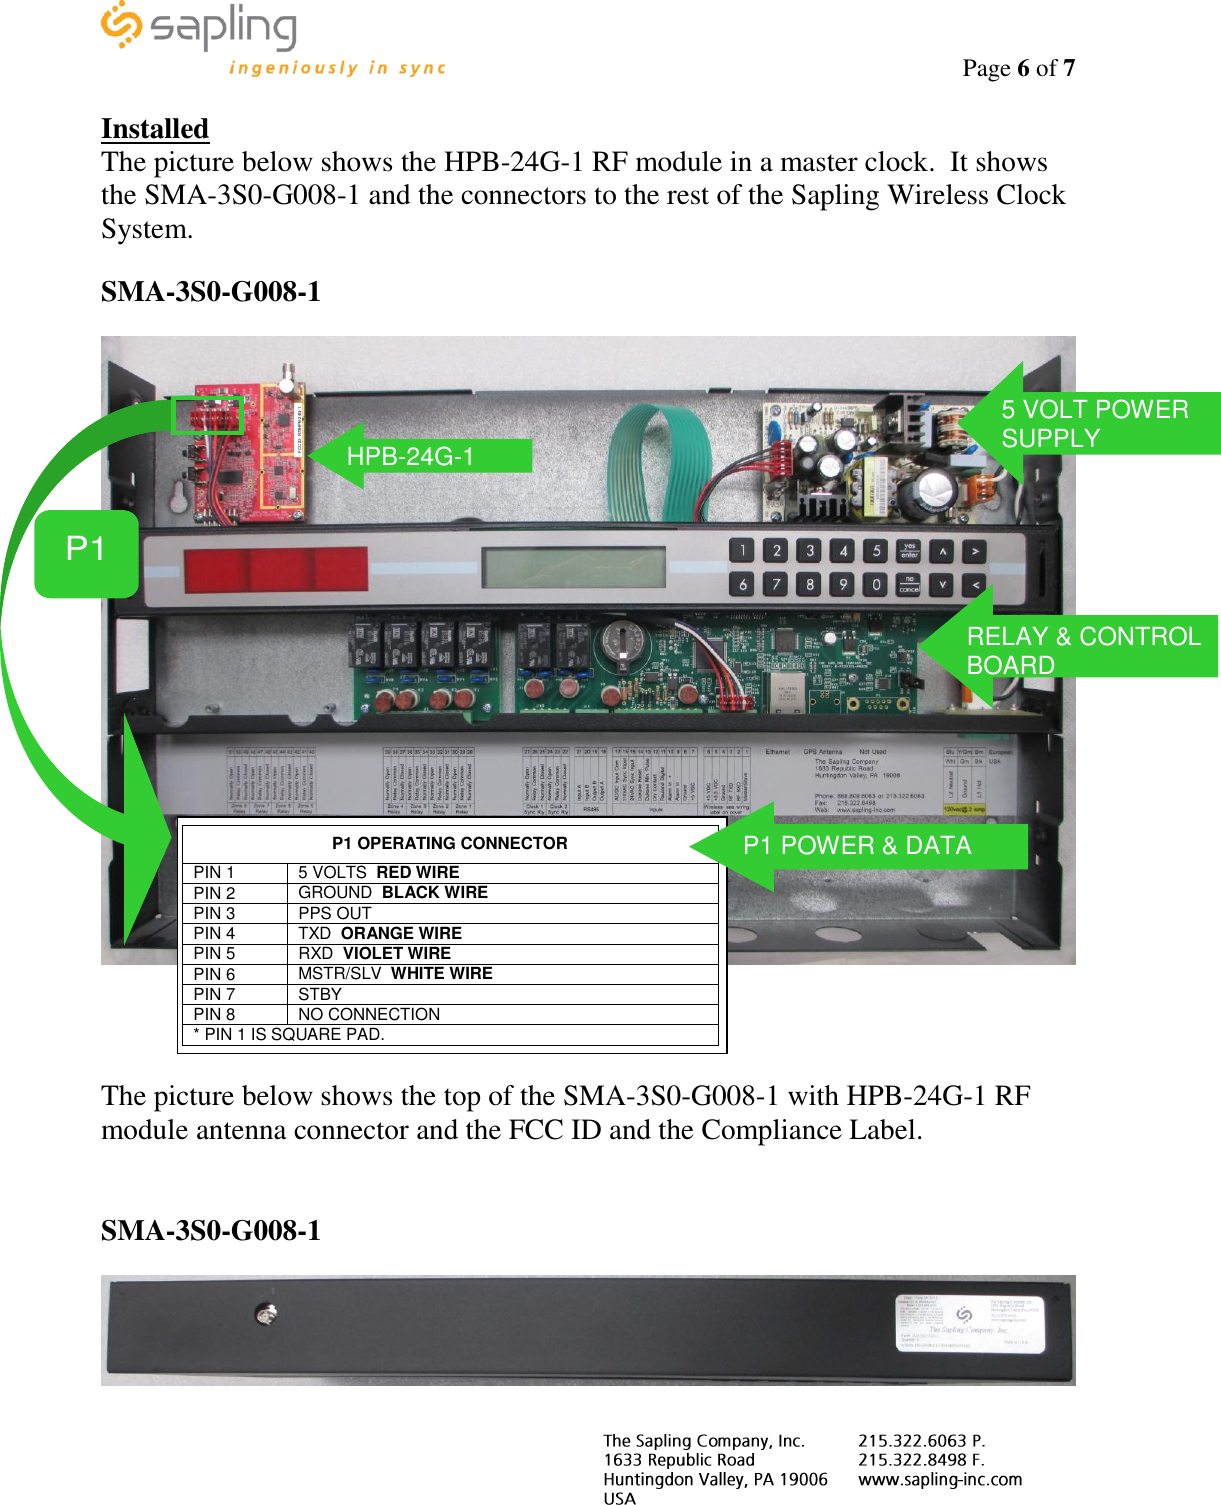                                                                                    Page 6 of 7     Installed The picture below shows the HPB-24G-1 RF module in a master clock.  It shows the SMA-3S0-G008-1 and the connectors to the rest of the Sapling Wireless Clock System.  SMA-3S0-G008-1       The picture below shows the top of the SMA-3S0-G008-1 with HPB-24G-1 RF module antenna connector and the FCC ID and the Compliance Label.   SMA-3S0-G008-1   FCC ID: R73HPB-24G-1 HPB-24G-1  P1  P1 OPERATING CONNECTOR PIN 1 5 VOLTS  RED WIRE PIN 2 GROUND  BLACK WIRE PIN 3 PPS OUT  PIN 4 TXD  ORANGE WIRE PIN 5 RXD  VIOLET WIRE PIN 6 MSTR/SLV  WHITE WIRE PIN 7 STBY PIN 8 NO CONNECTION * PIN 1 IS SQUARE PAD.  P1 POWER &amp; DATA 5 VOLT POWER SUPPLY RELAY &amp; CONTROL BOARD 